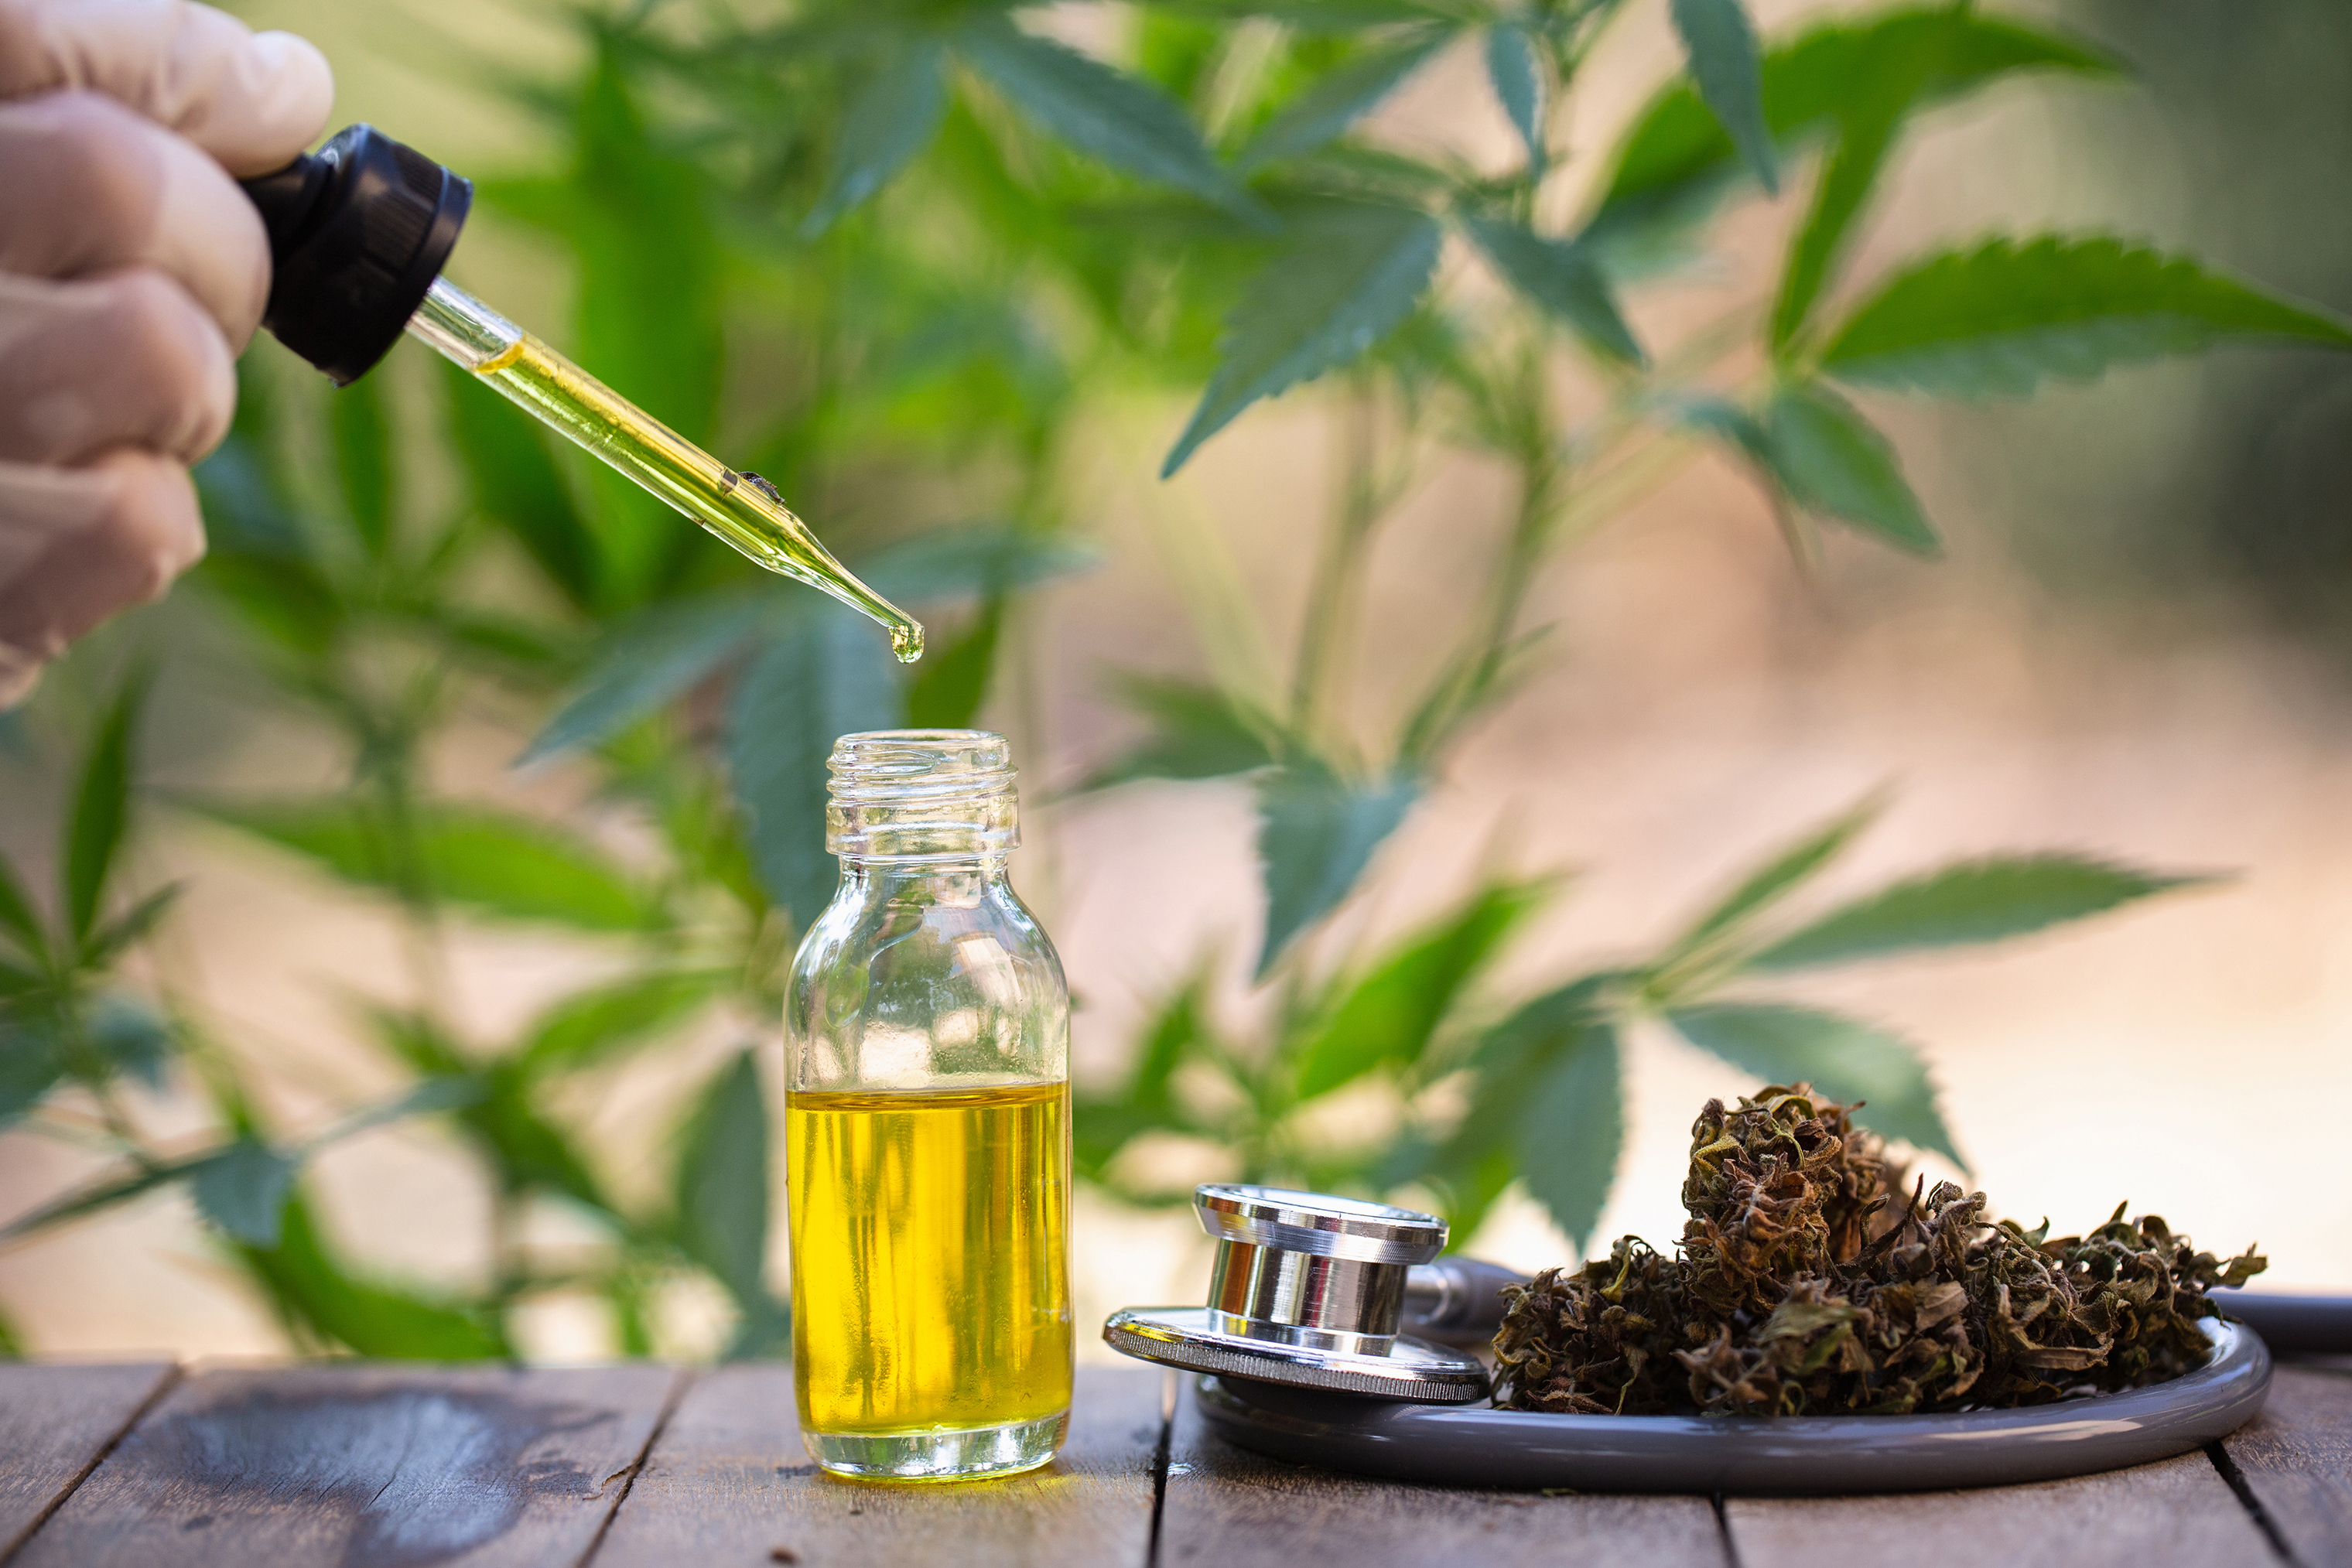 How Do Growers Get The Higher Content Of Cbd Oil In Marijuana - Cbd|Oil|Cannabidiol|Products|View|Abstract|Effects|Hemp|Cannabis|Product|Thc|Pain|People|Health|Body|Plant|Cannabinoids|Medications|Oils|Drug|Benefits|System|Study|Marijuana|Anxiety|Side|Research|Effect|Liver|Quality|Treatment|Studies|Epilepsy|Symptoms|Gummies|Compounds|Dose|Time|Inflammation|Bottle|Cbd Oil|View Abstract|Side Effects|Cbd Products|Endocannabinoid System|Multiple Sclerosis|Cbd Oils|Cbd Gummies|Cannabis Plant|Hemp Oil|Cbd Product|Hemp Plant|United States|Cytochrome P450|Many People|Chronic Pain|Nuleaf Naturals|Royal Cbd|Full-Spectrum Cbd Oil|Drug Administration|Cbd Oil Products|Medical Marijuana|Drug Test|Heavy Metals|Clinical Trial|Clinical Trials|Cbd Oil Side|Rating Highlights|Wide Variety|Animal Studies